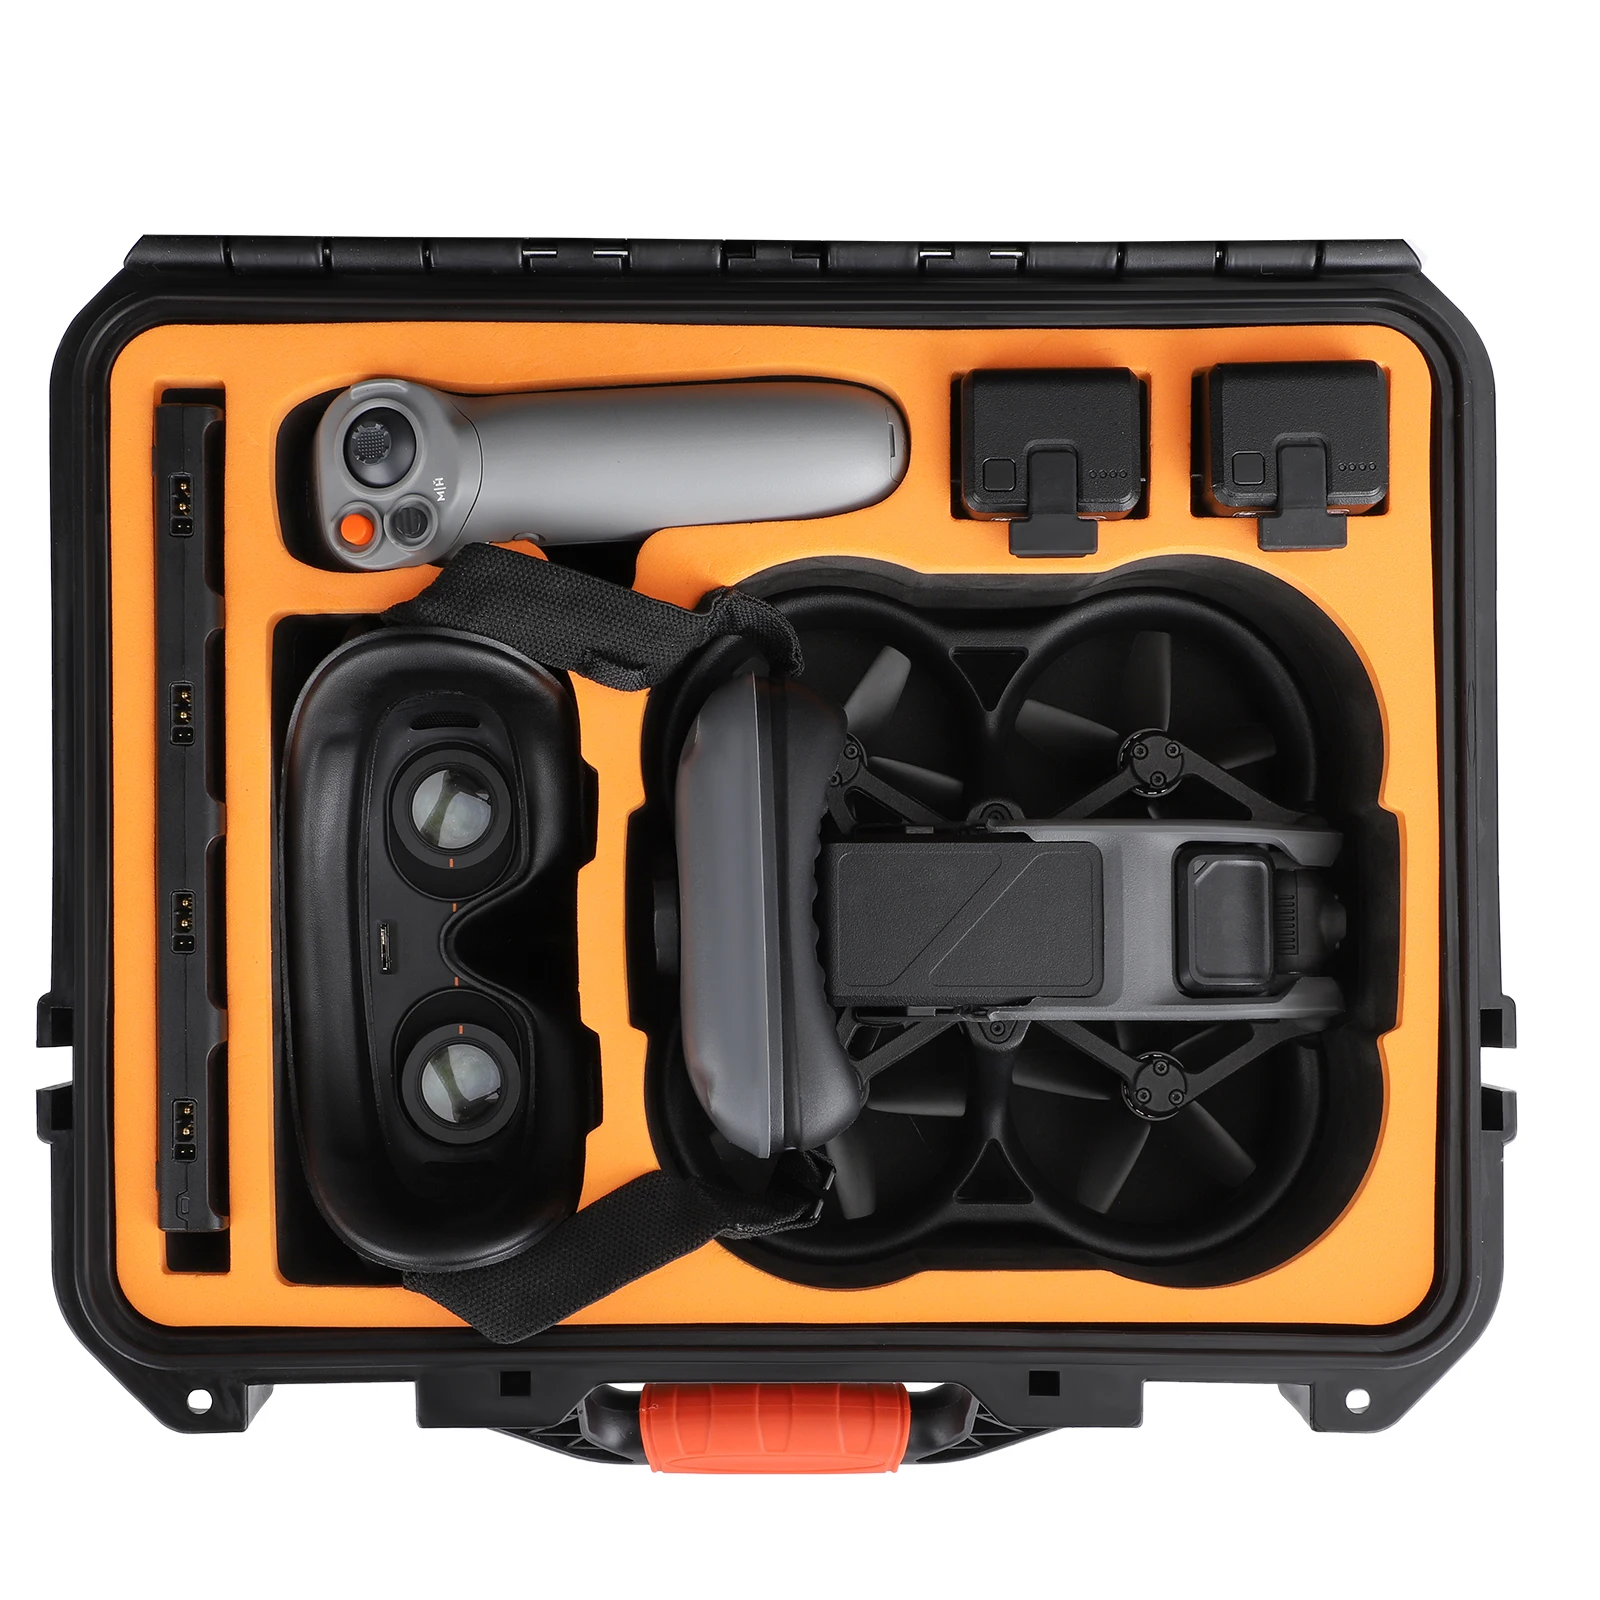 Waterproof safety case for DJI Avata Discovery Edition flight glasses integrated drop-proof protective storage suitcase